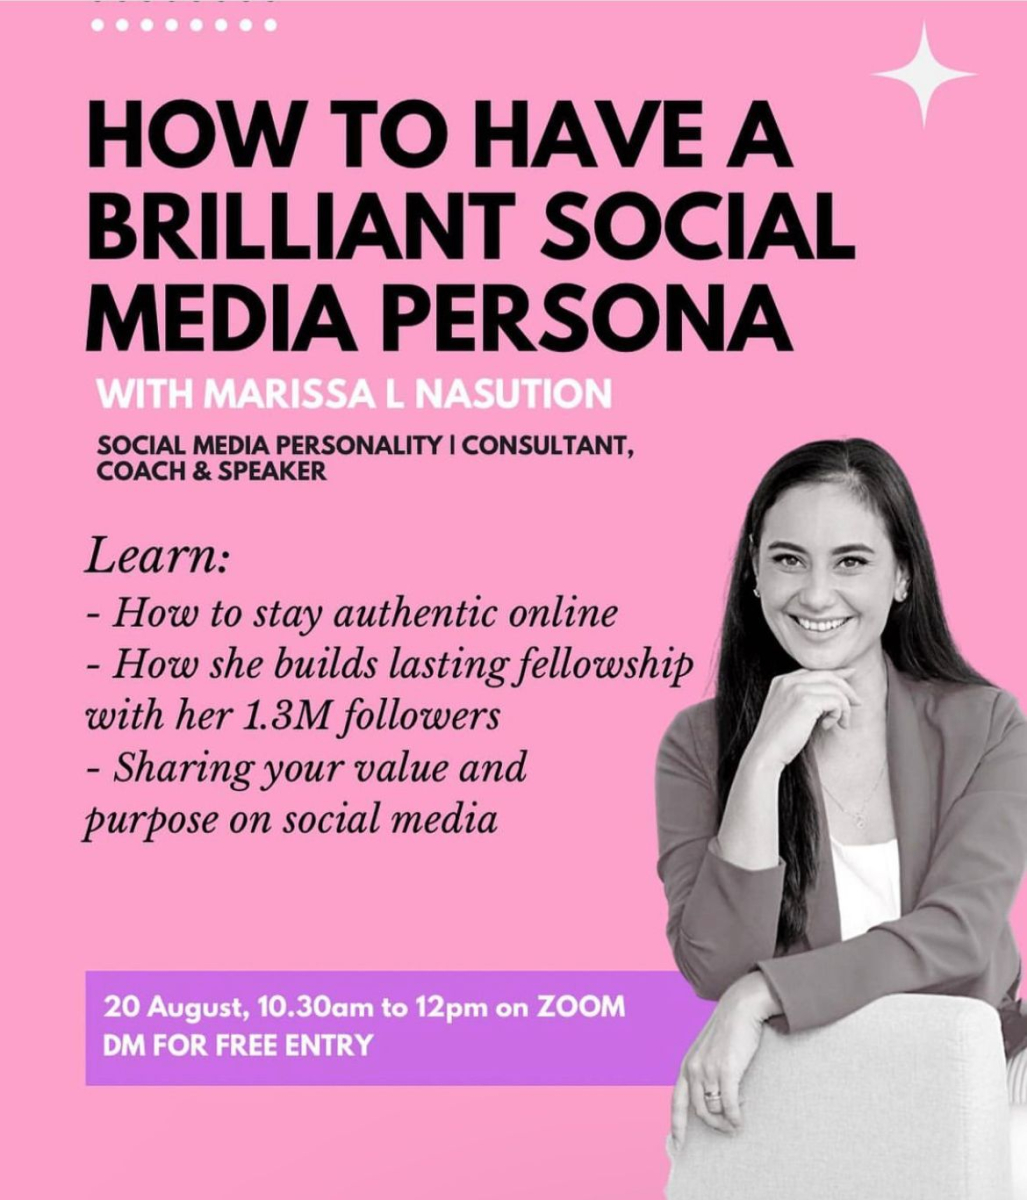 How to Have a Brilliant Social Media Persona